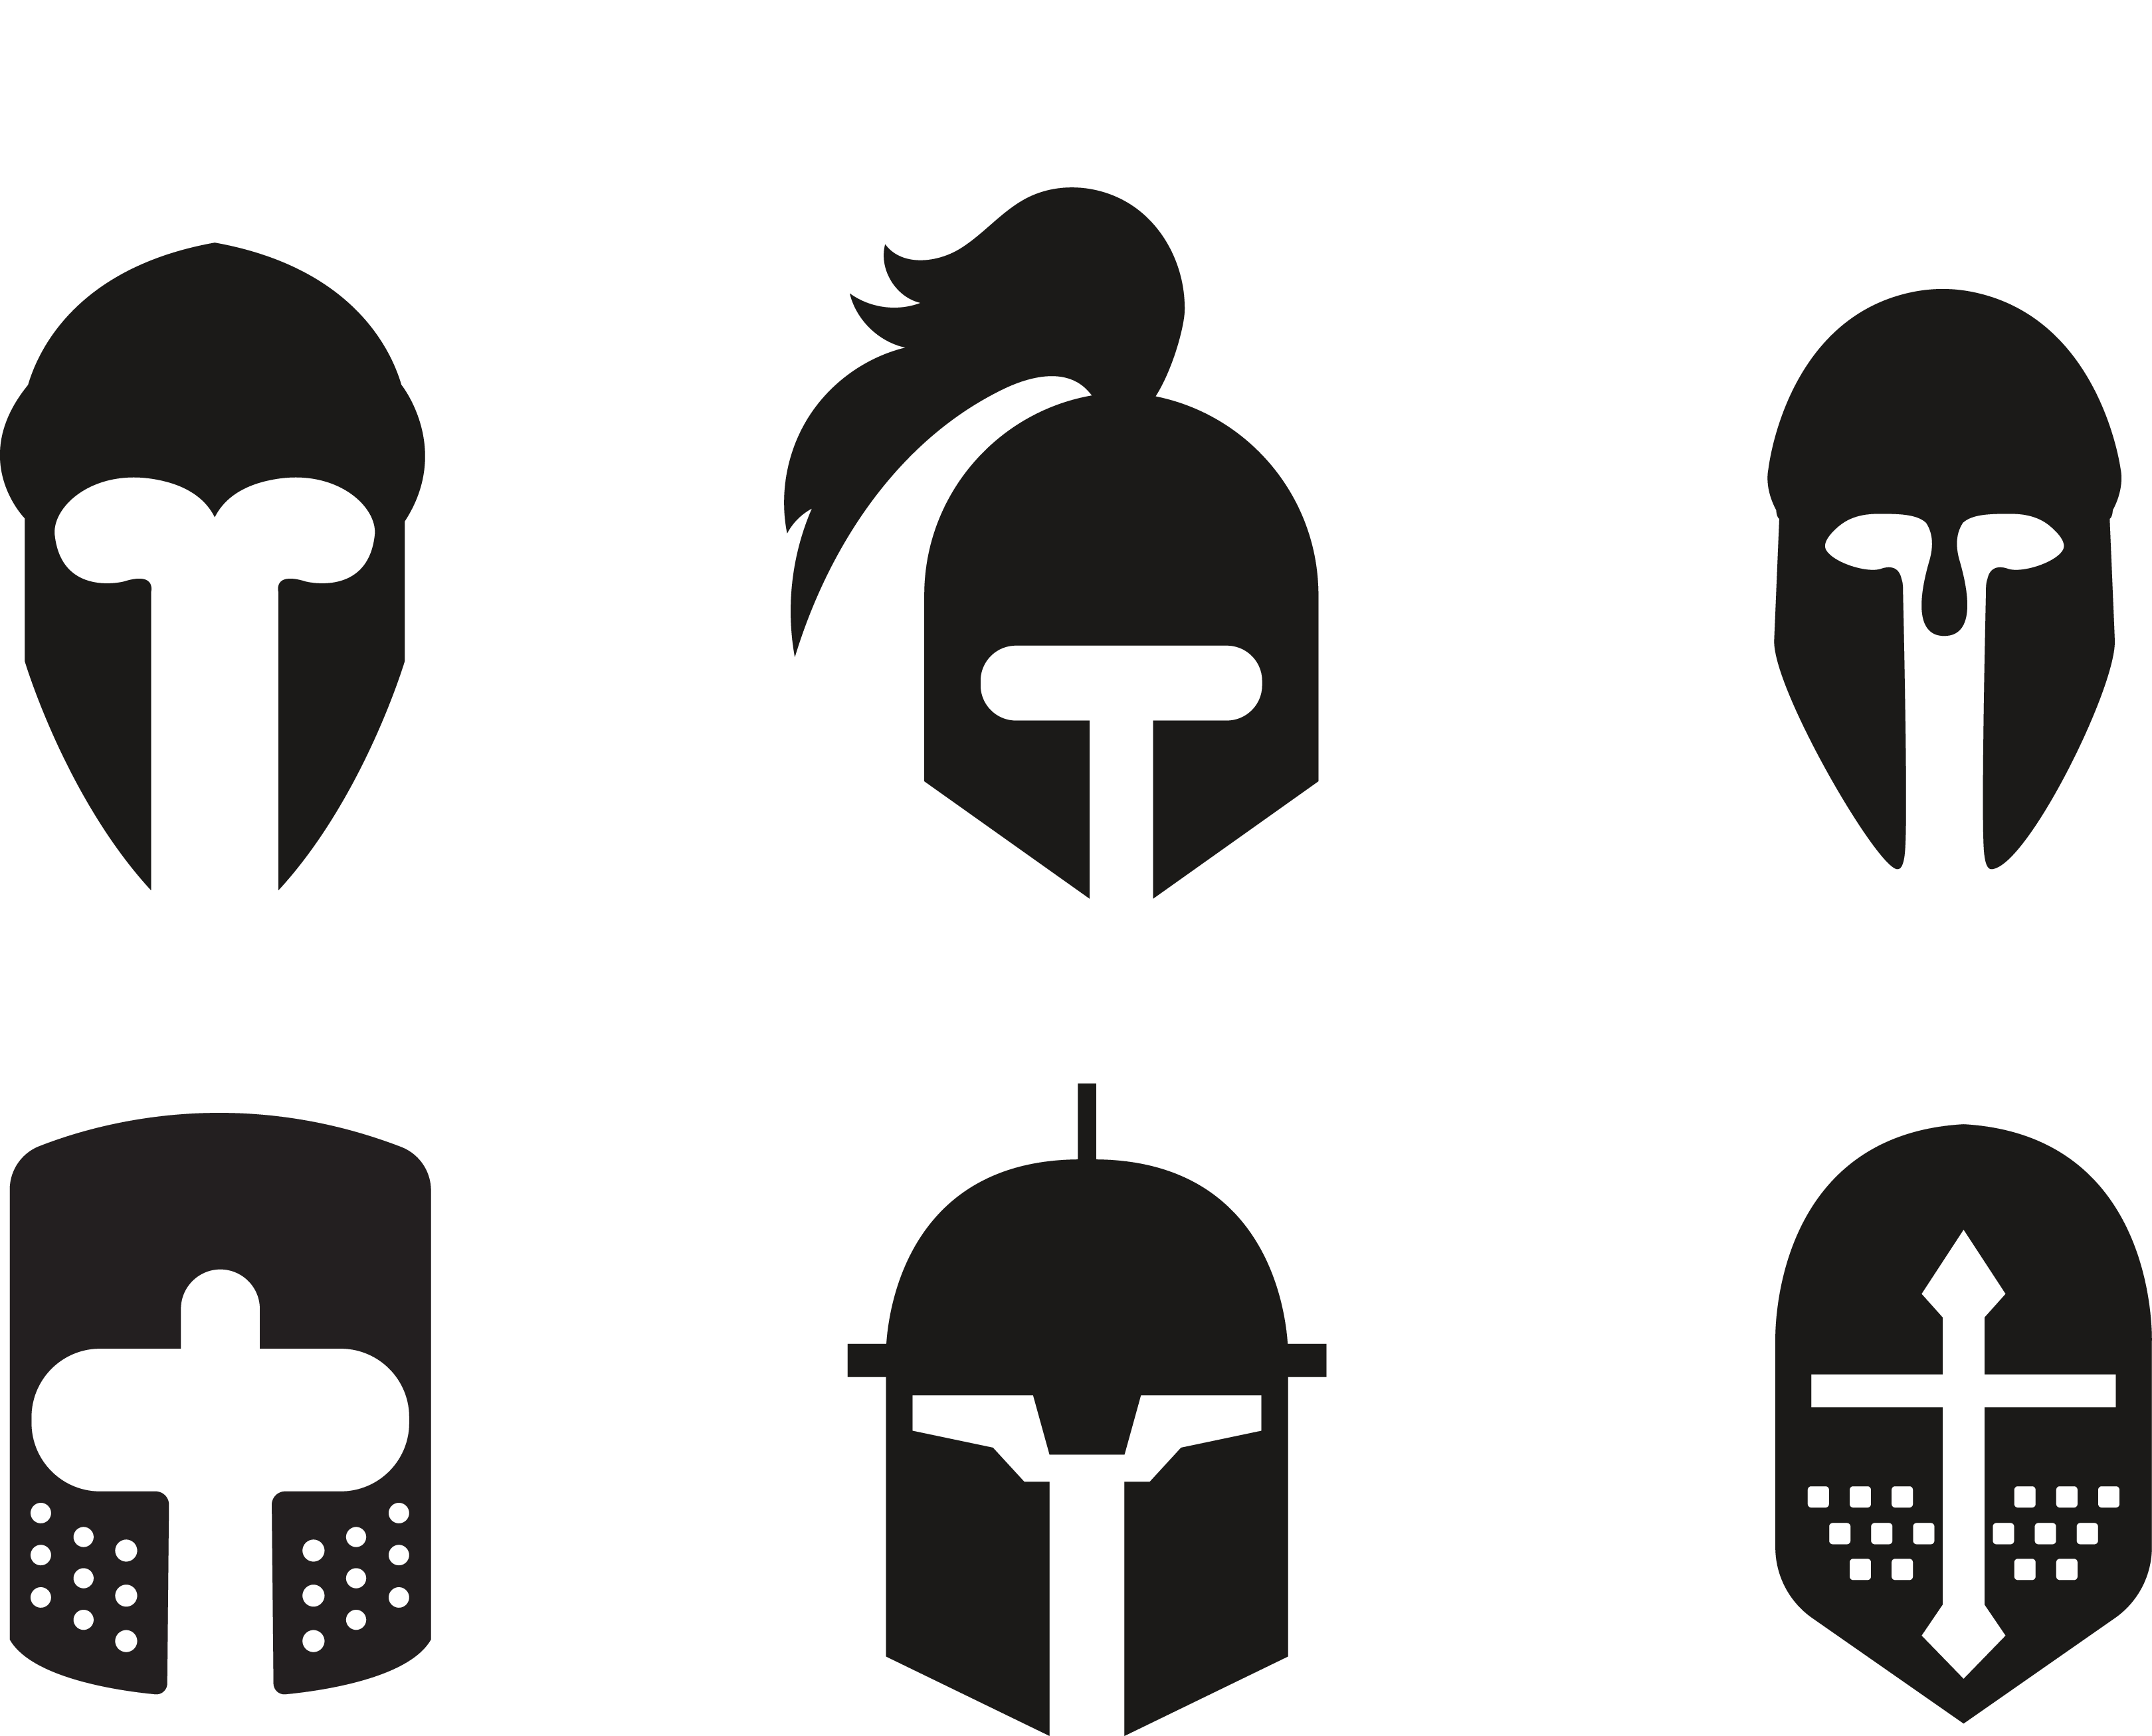 Silhouette at getdrawings com. Spartan clipart knight helmet